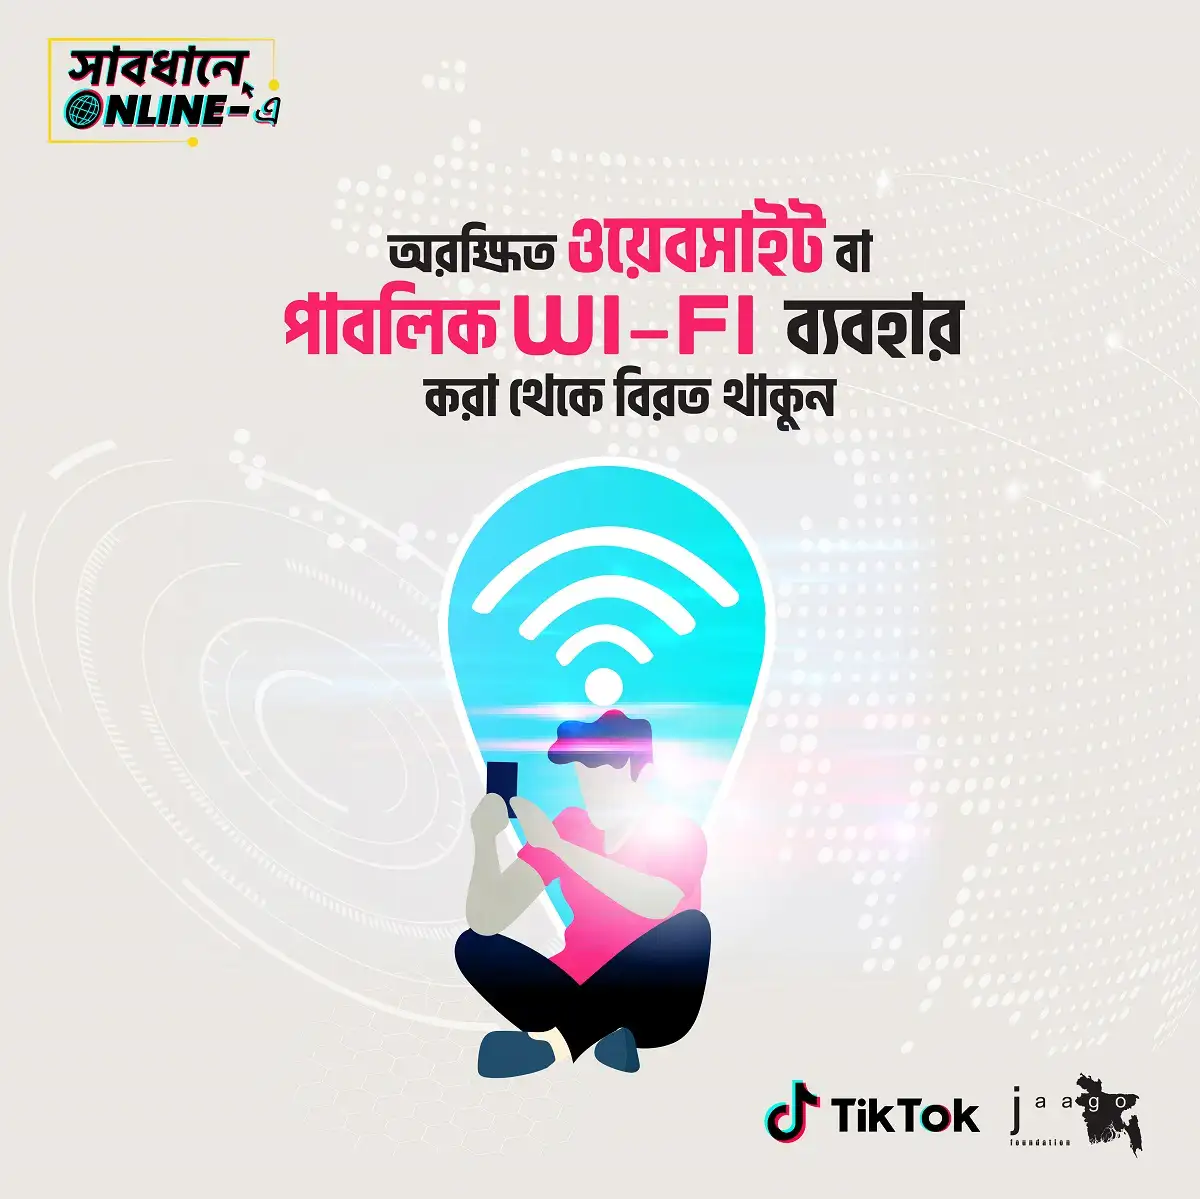 Ignore-public-WIFI-to-be-safe-online-Shabdhane-Online-e-A-project-by-JAAGO-Foundation